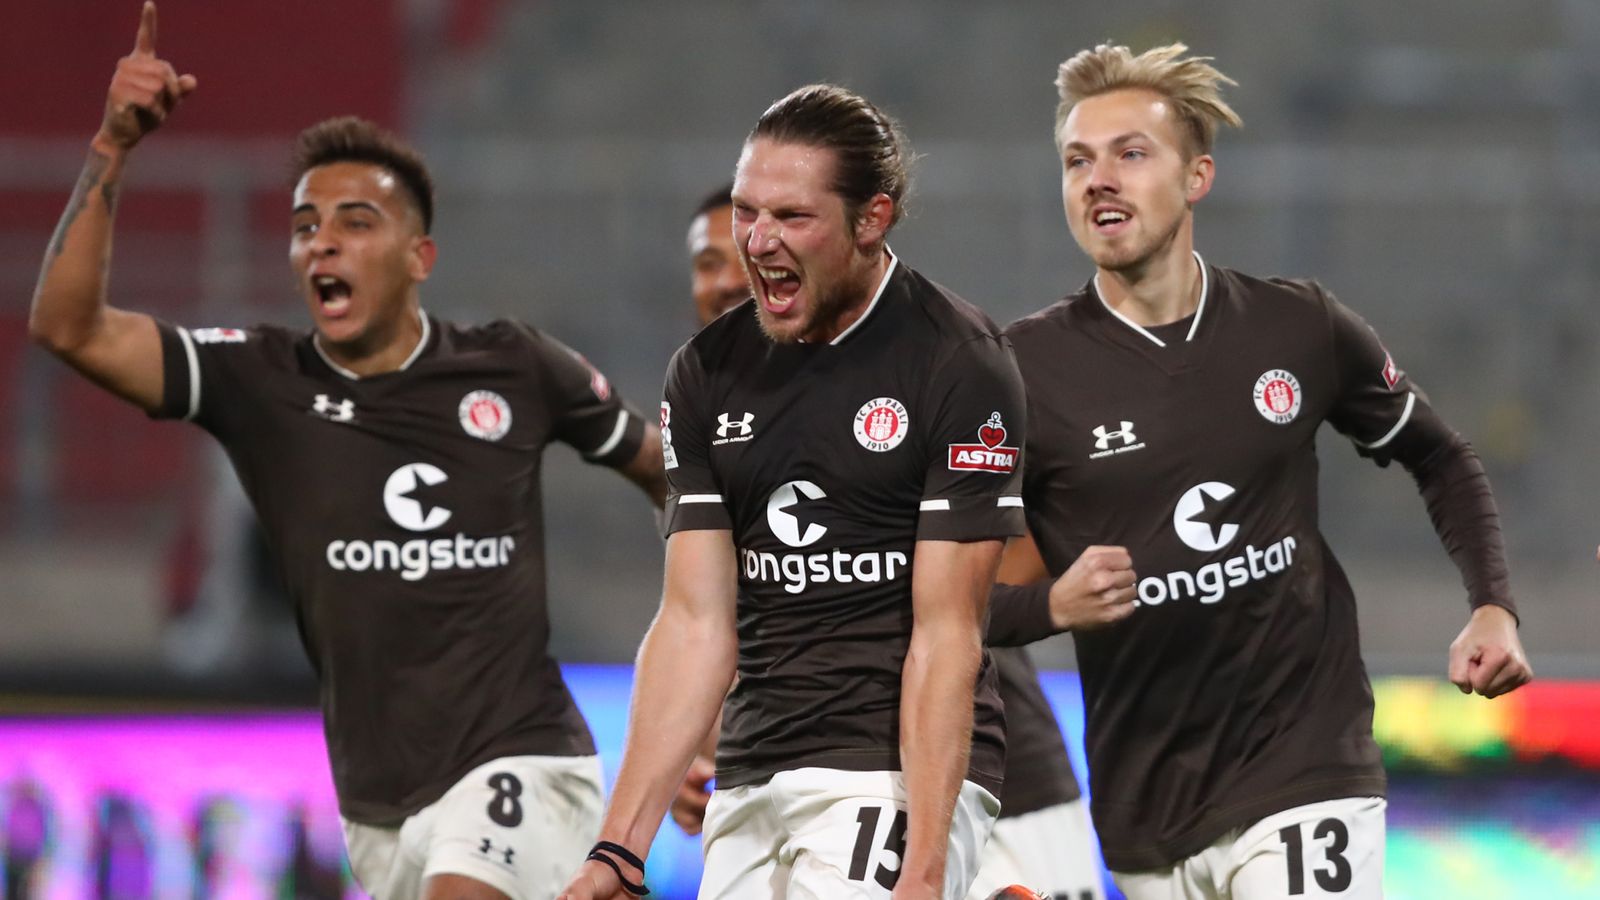 St Pauli to manufacture in-house sustainable kit next season - Football News - Sky Sports